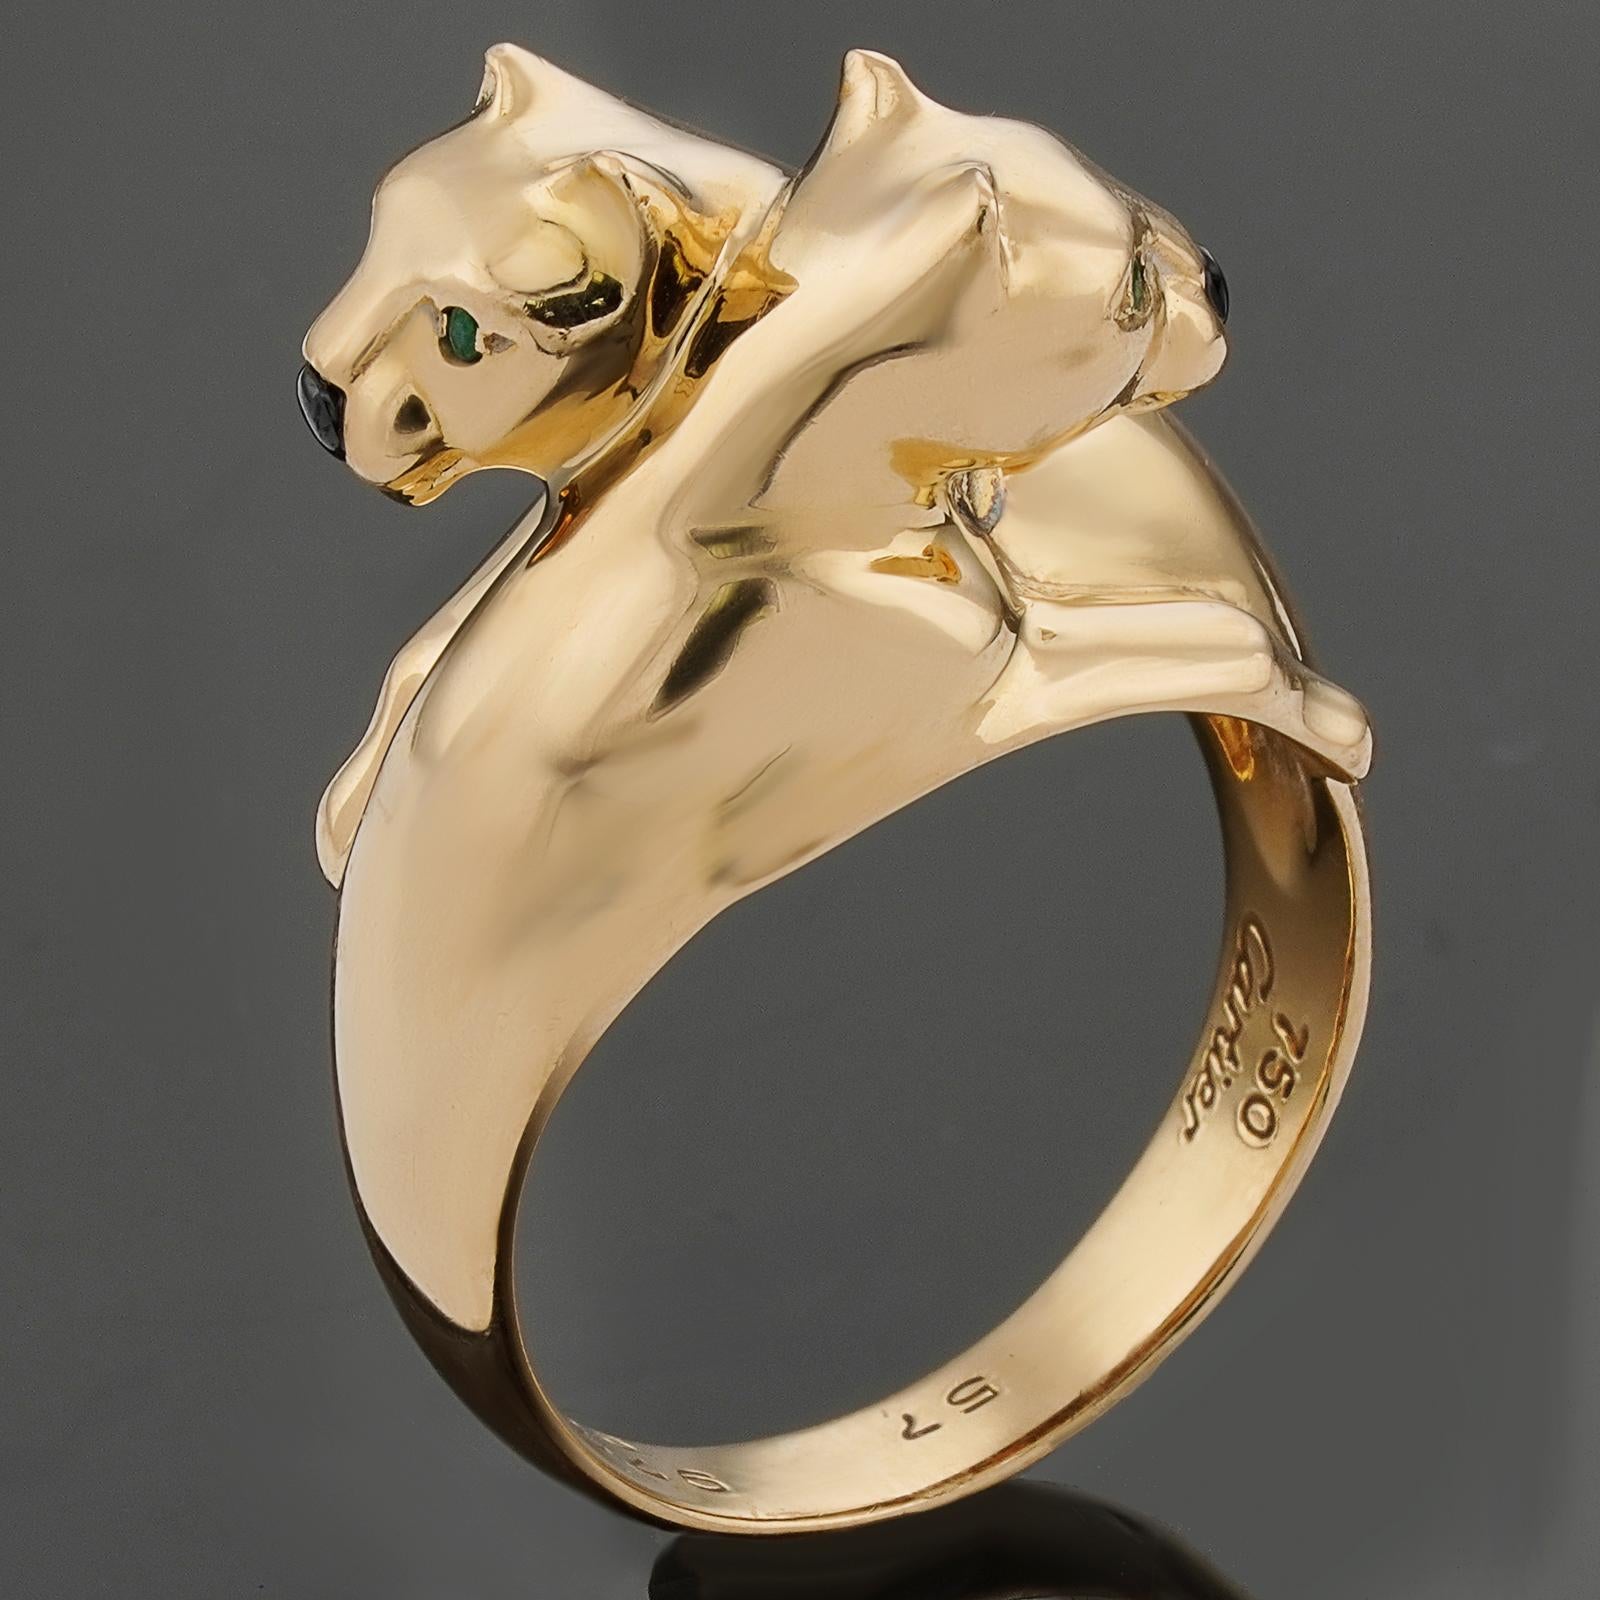 This gorgeous authentic Cartier ring from the iconic Panthere de Cartier collection is crafted in 18k yellow gold and features an intertwined double panther head design accented with a black onyx nose and green emerald eyes. Made in France circa